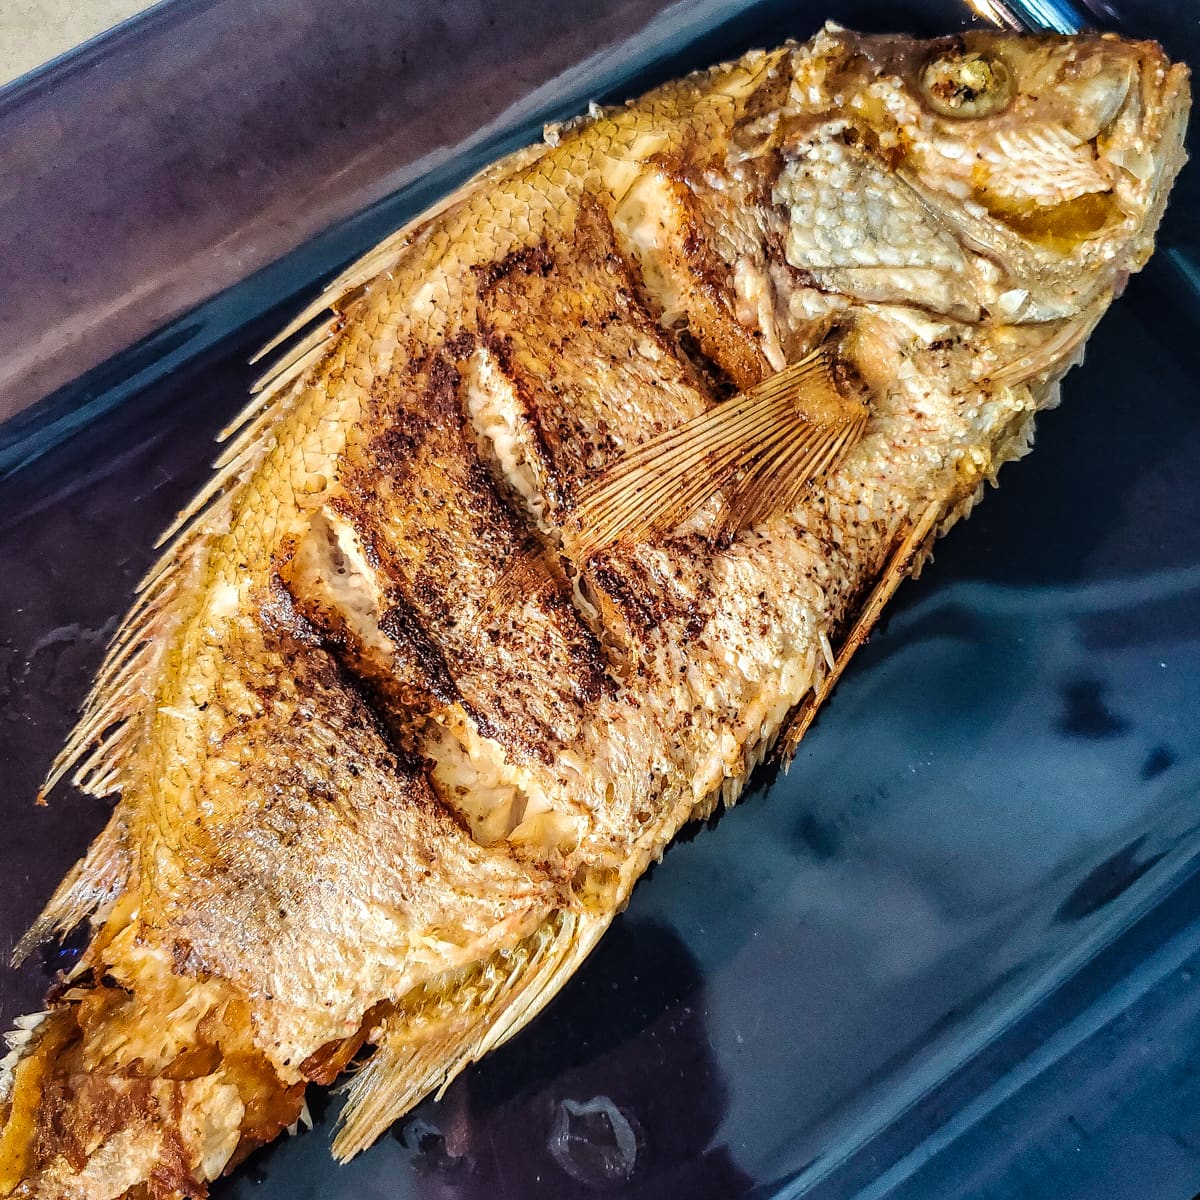 Fried whole snapper in a blue dish.